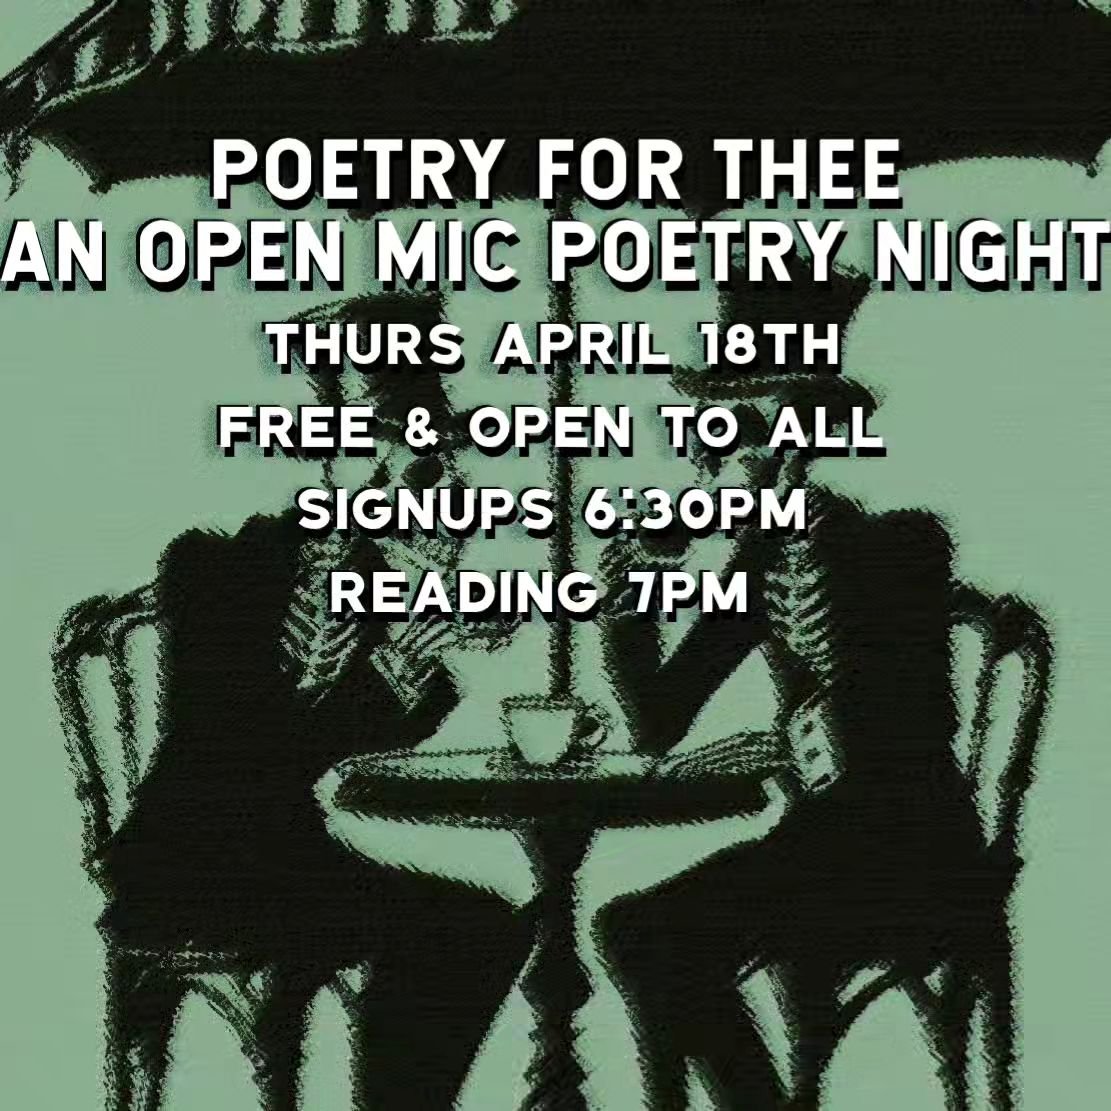 Thursday, April 18th! 
Poetry for thee hosted by Burnt
Open mic poetry night
Sign up at 6:30
Readings at 7
Free to attend &amp; participate